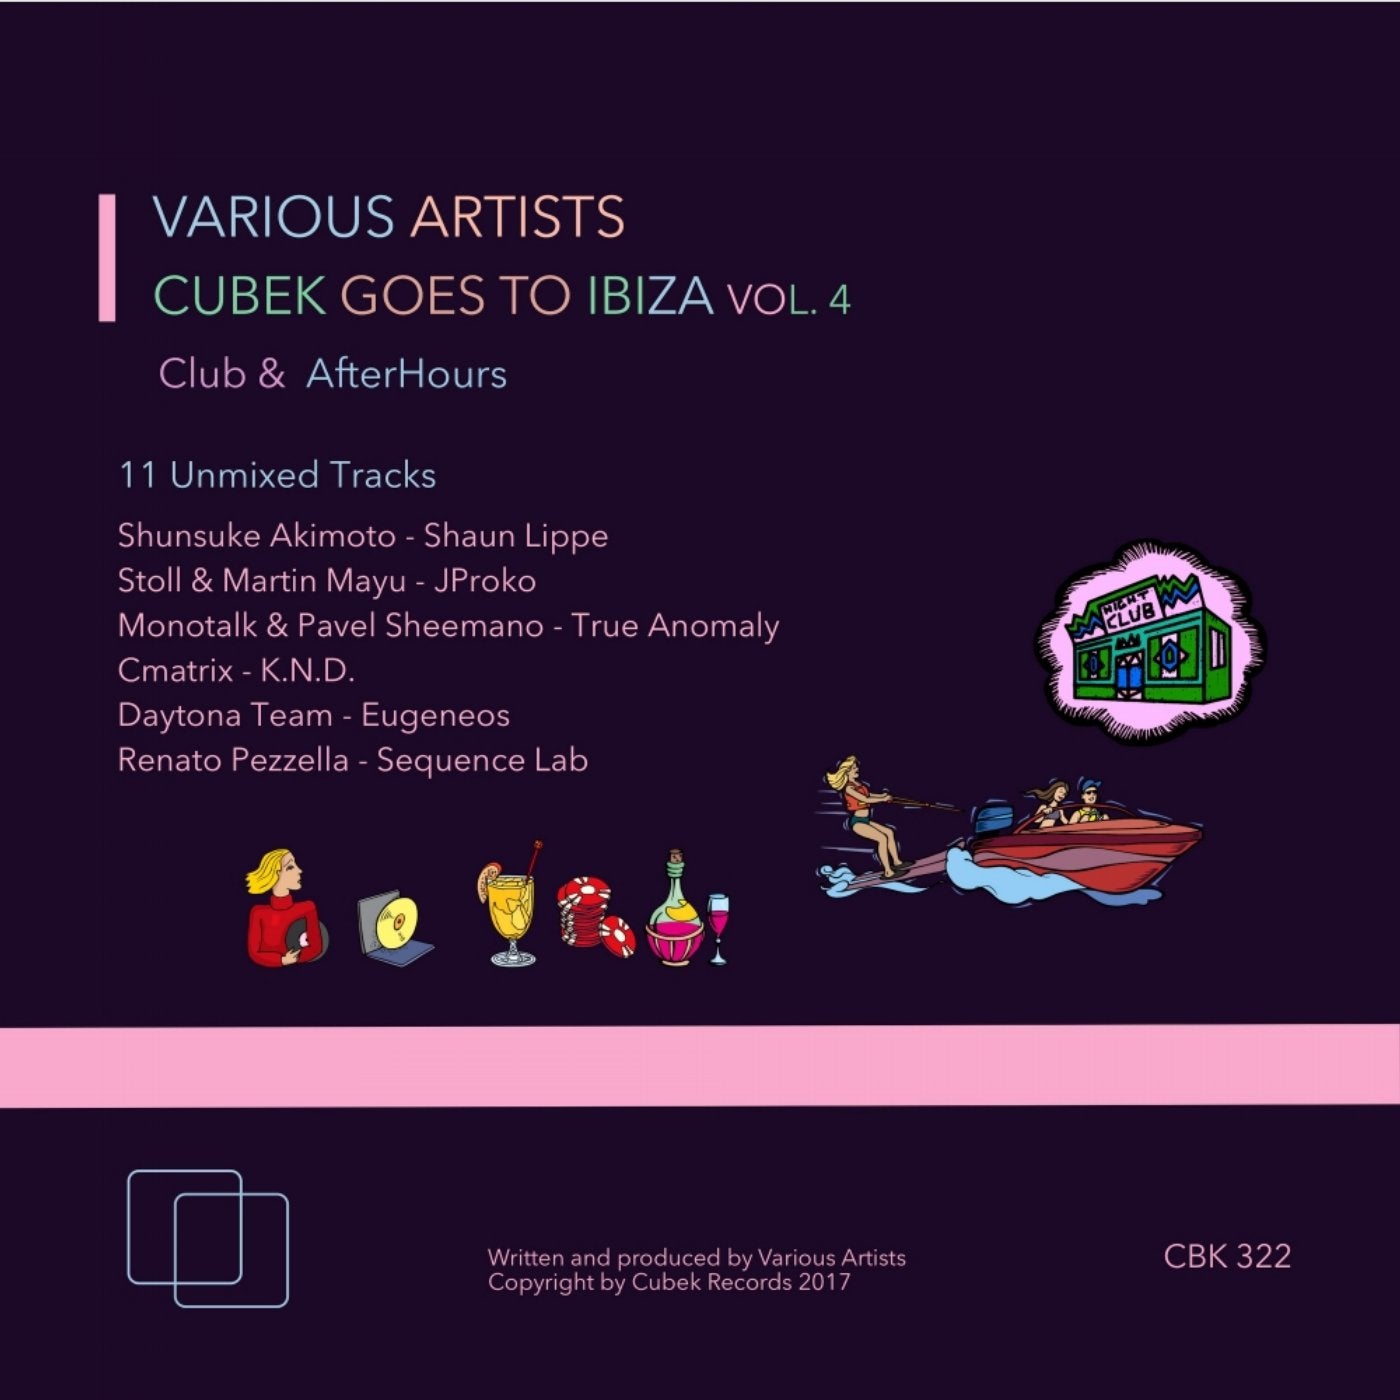 Cubek Goes To Ibiza, Vol. 4 (Club & AfterHours)